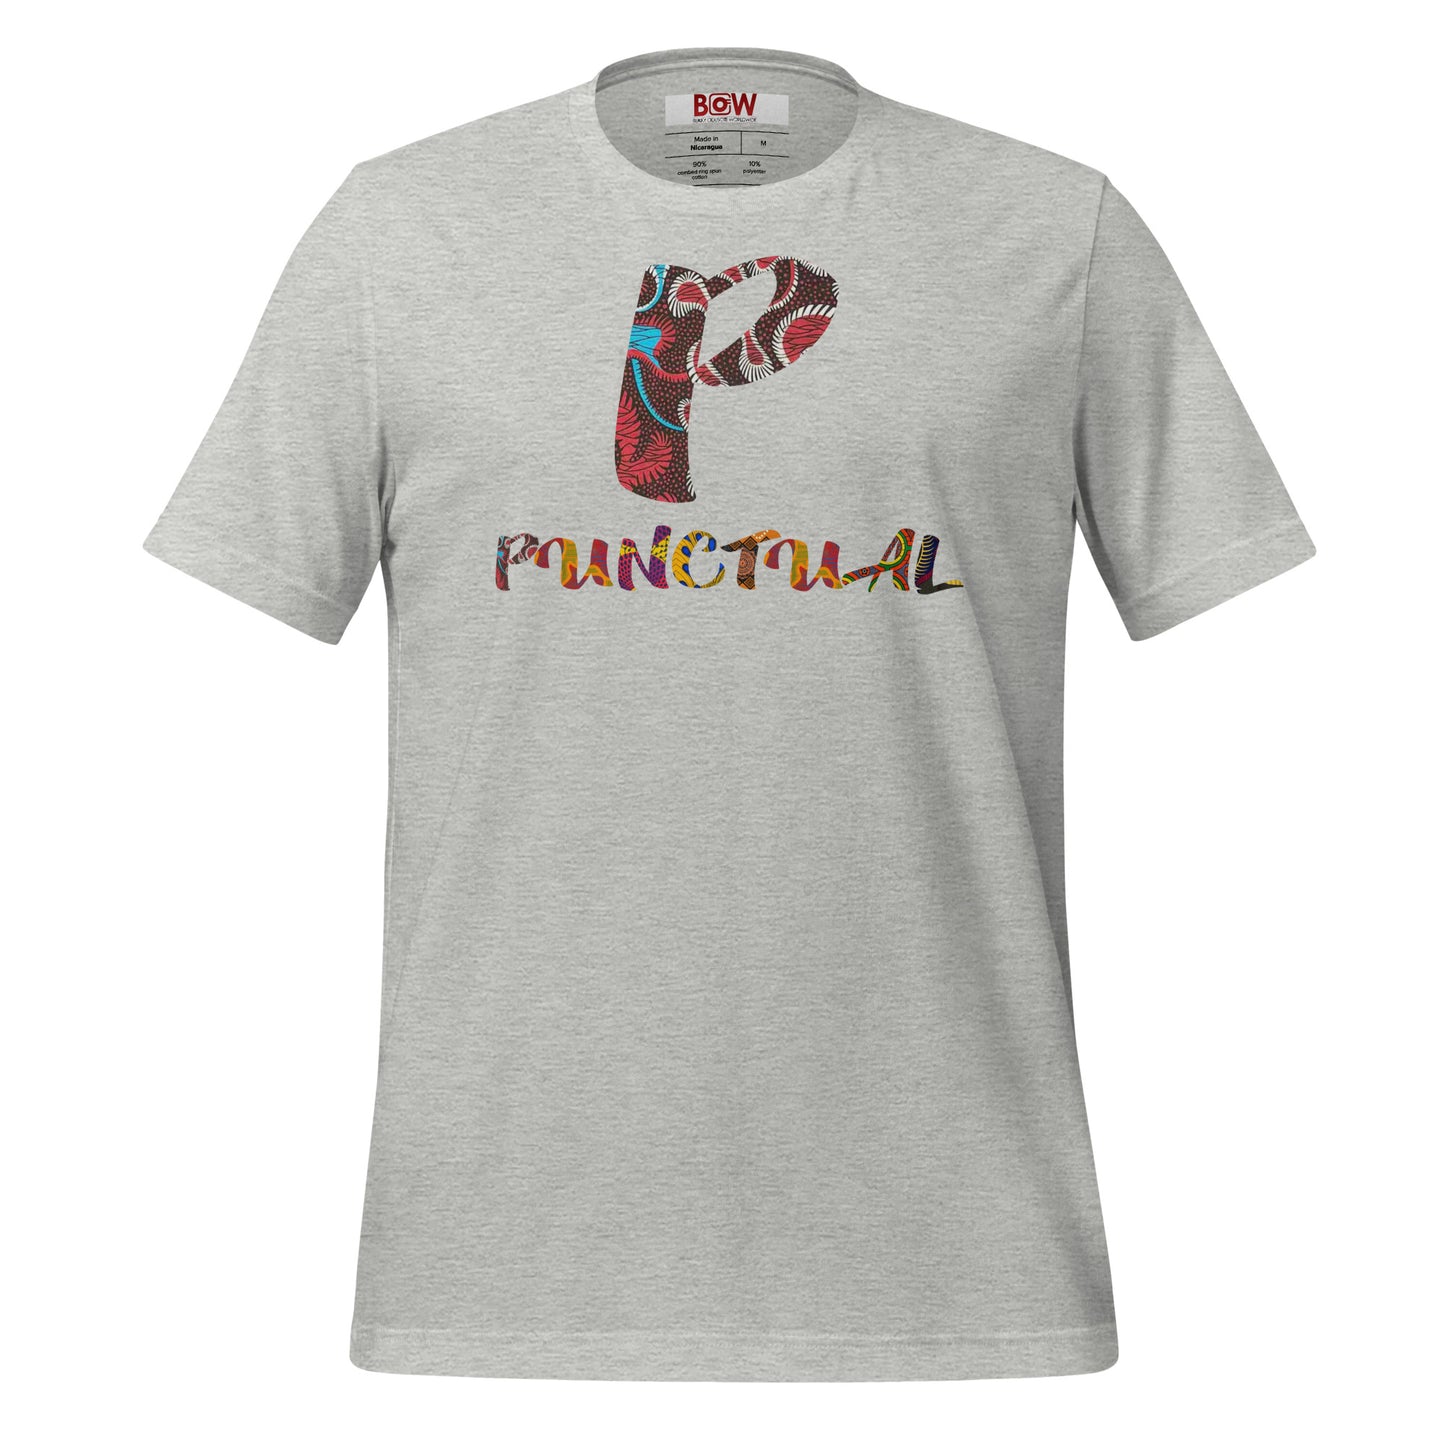 P For Punctual Unisex Afro Graphic T-Shirt